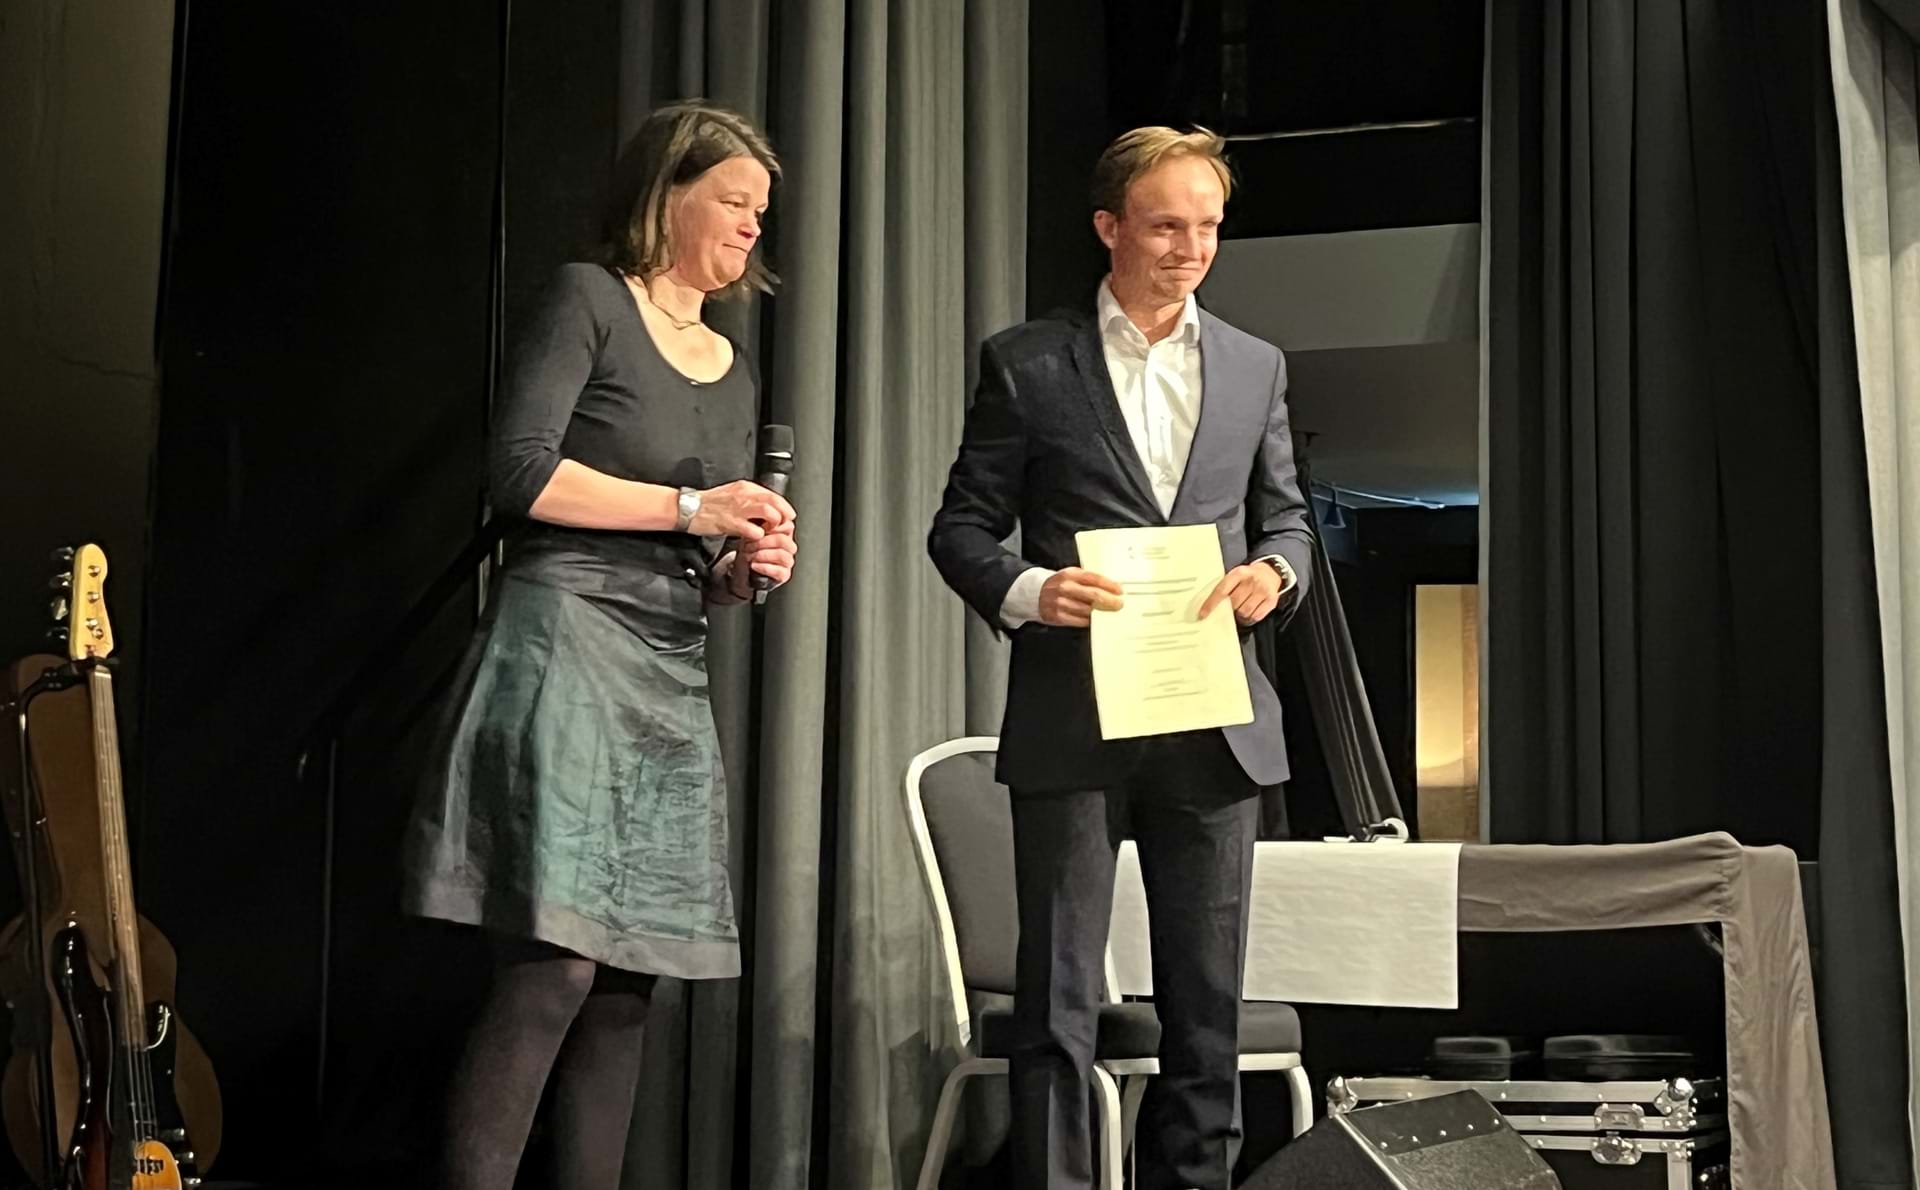 Man receiving award on stage, woman presenter next to him. Nicolai Klem and Anja Br&#230;nd